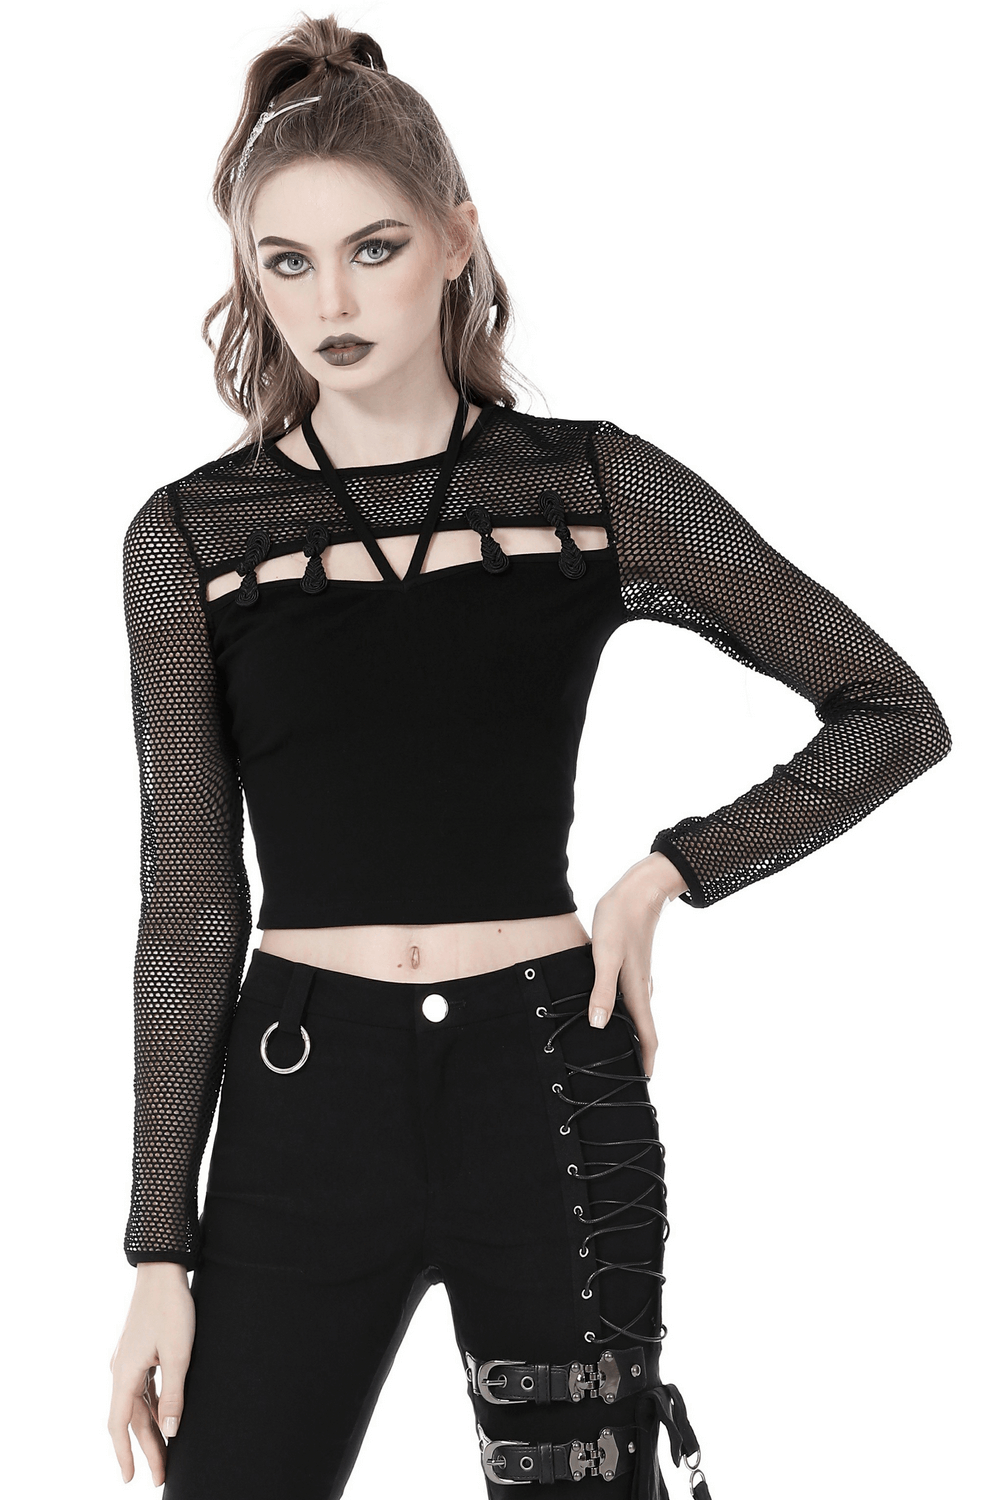 Punk Halter Mesh Top with Cutout Chest and Long Sleeves